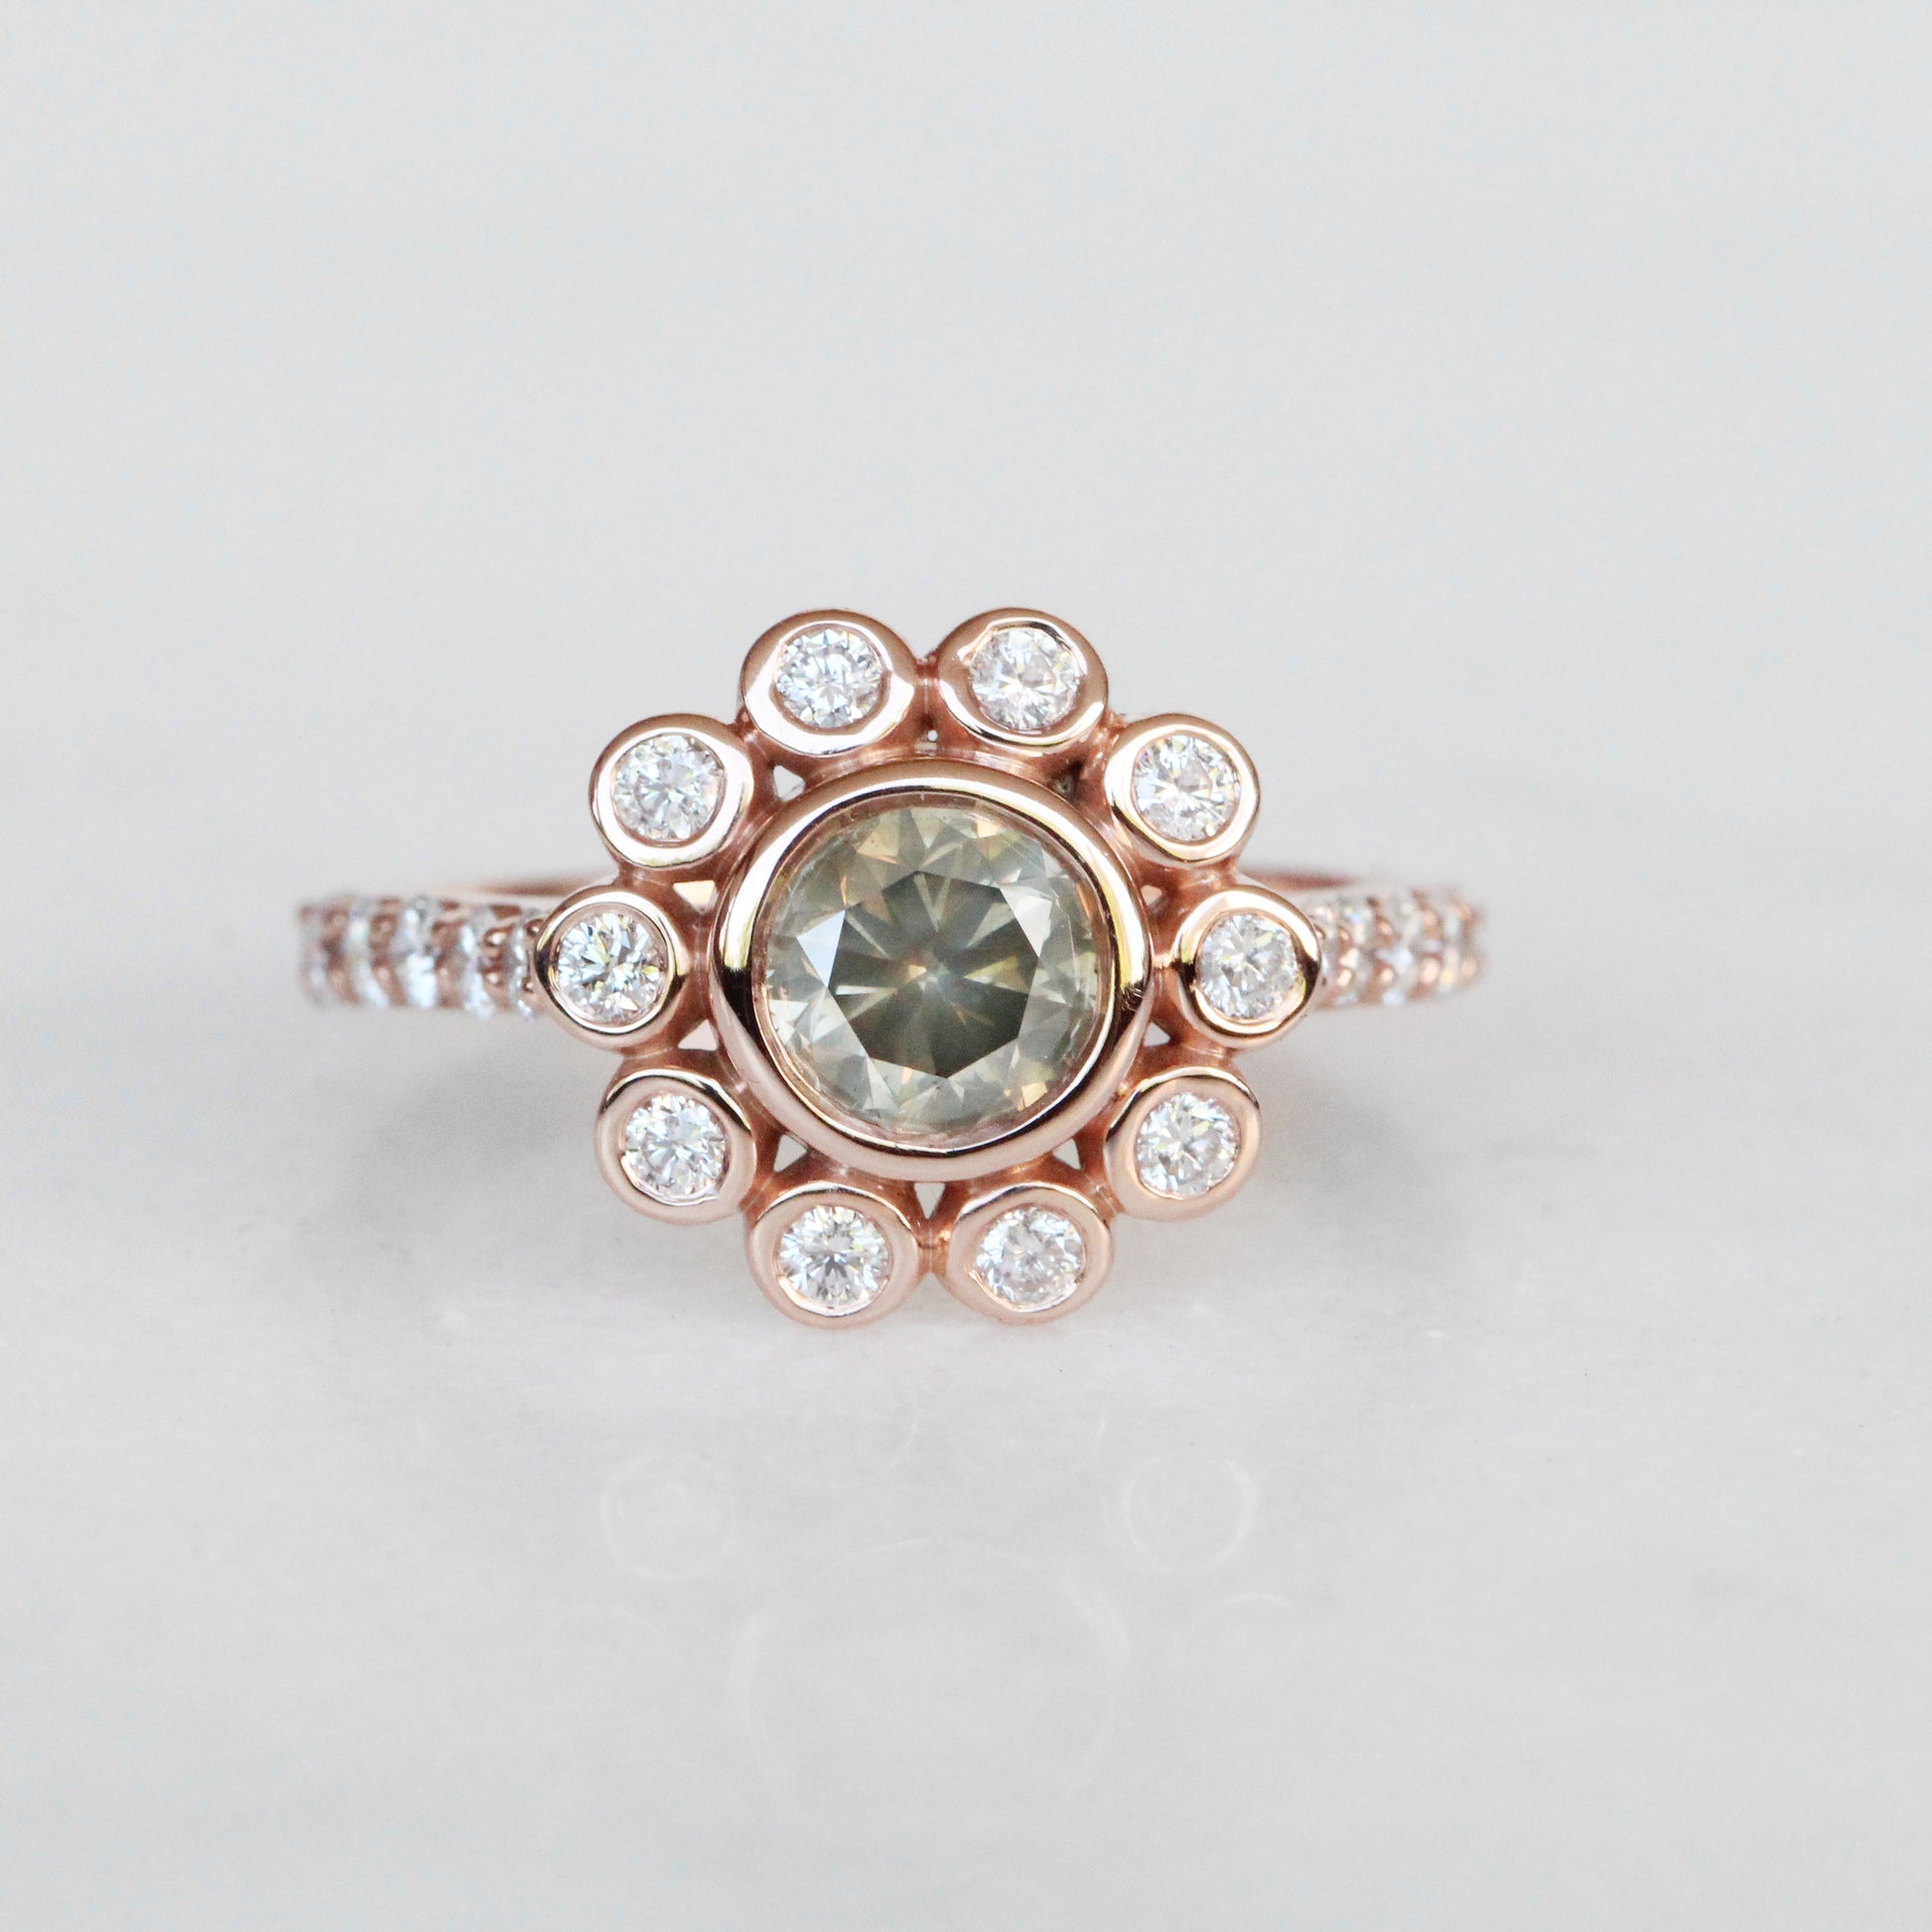 Minnie Antique Style bezel ring with a 1.02 carat certified diamond in 10k rose gold - ready to size and ship - Midwinter Co. Alternative Bridal Rings and Modern Fine Jewelry